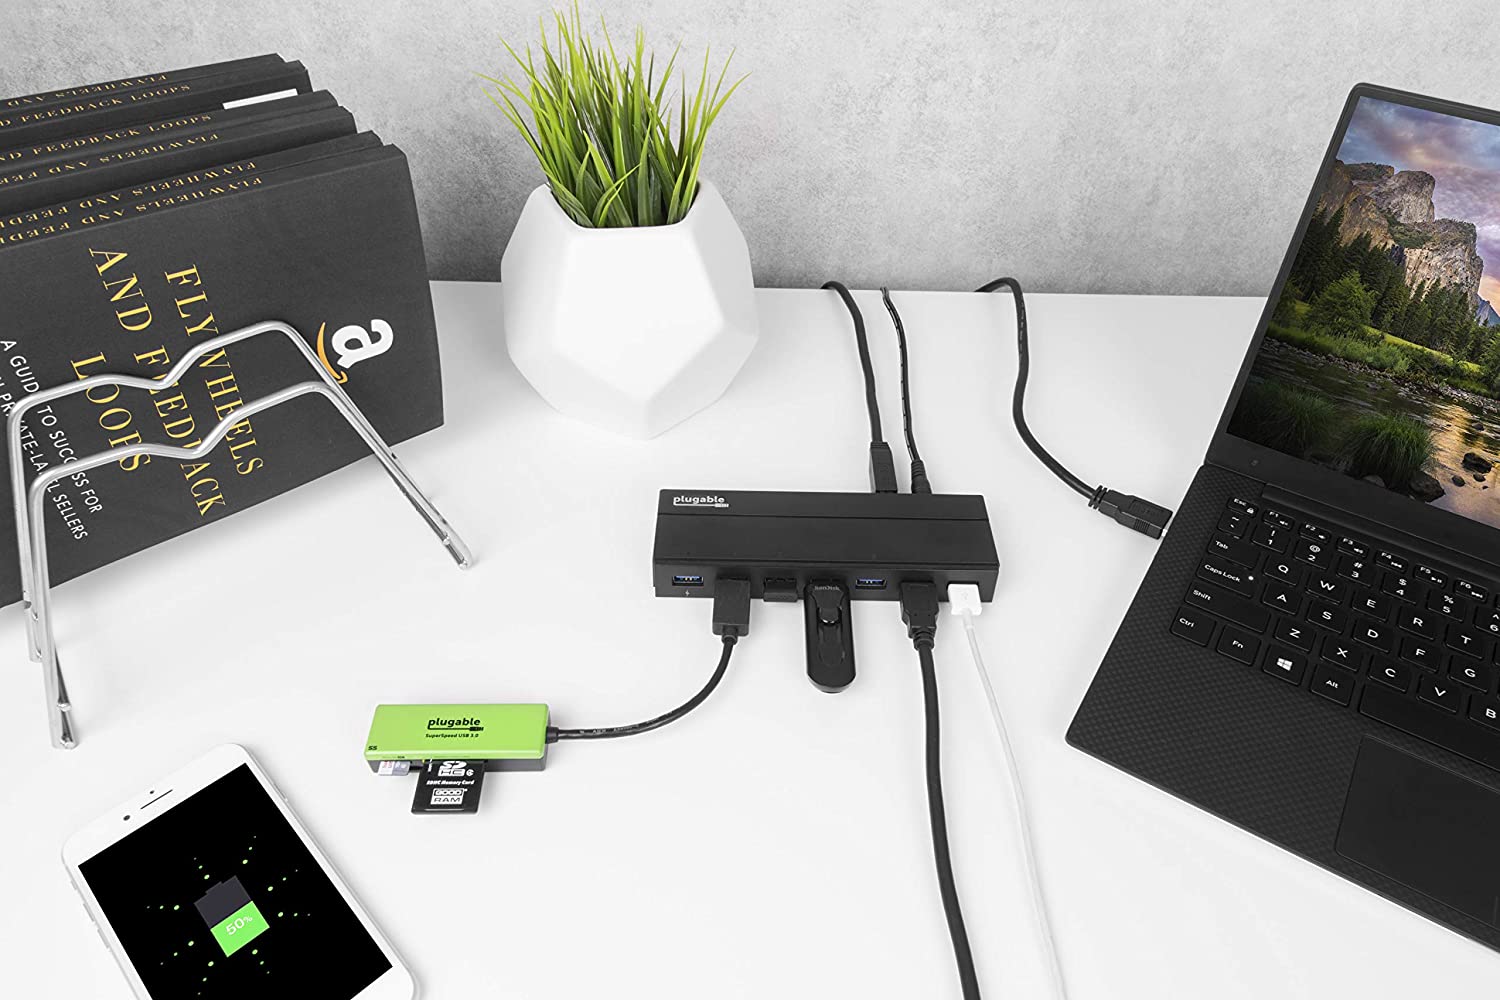 Plugable 7-Port USB 3.0 Hub with 36W Power Adapter - e4cents